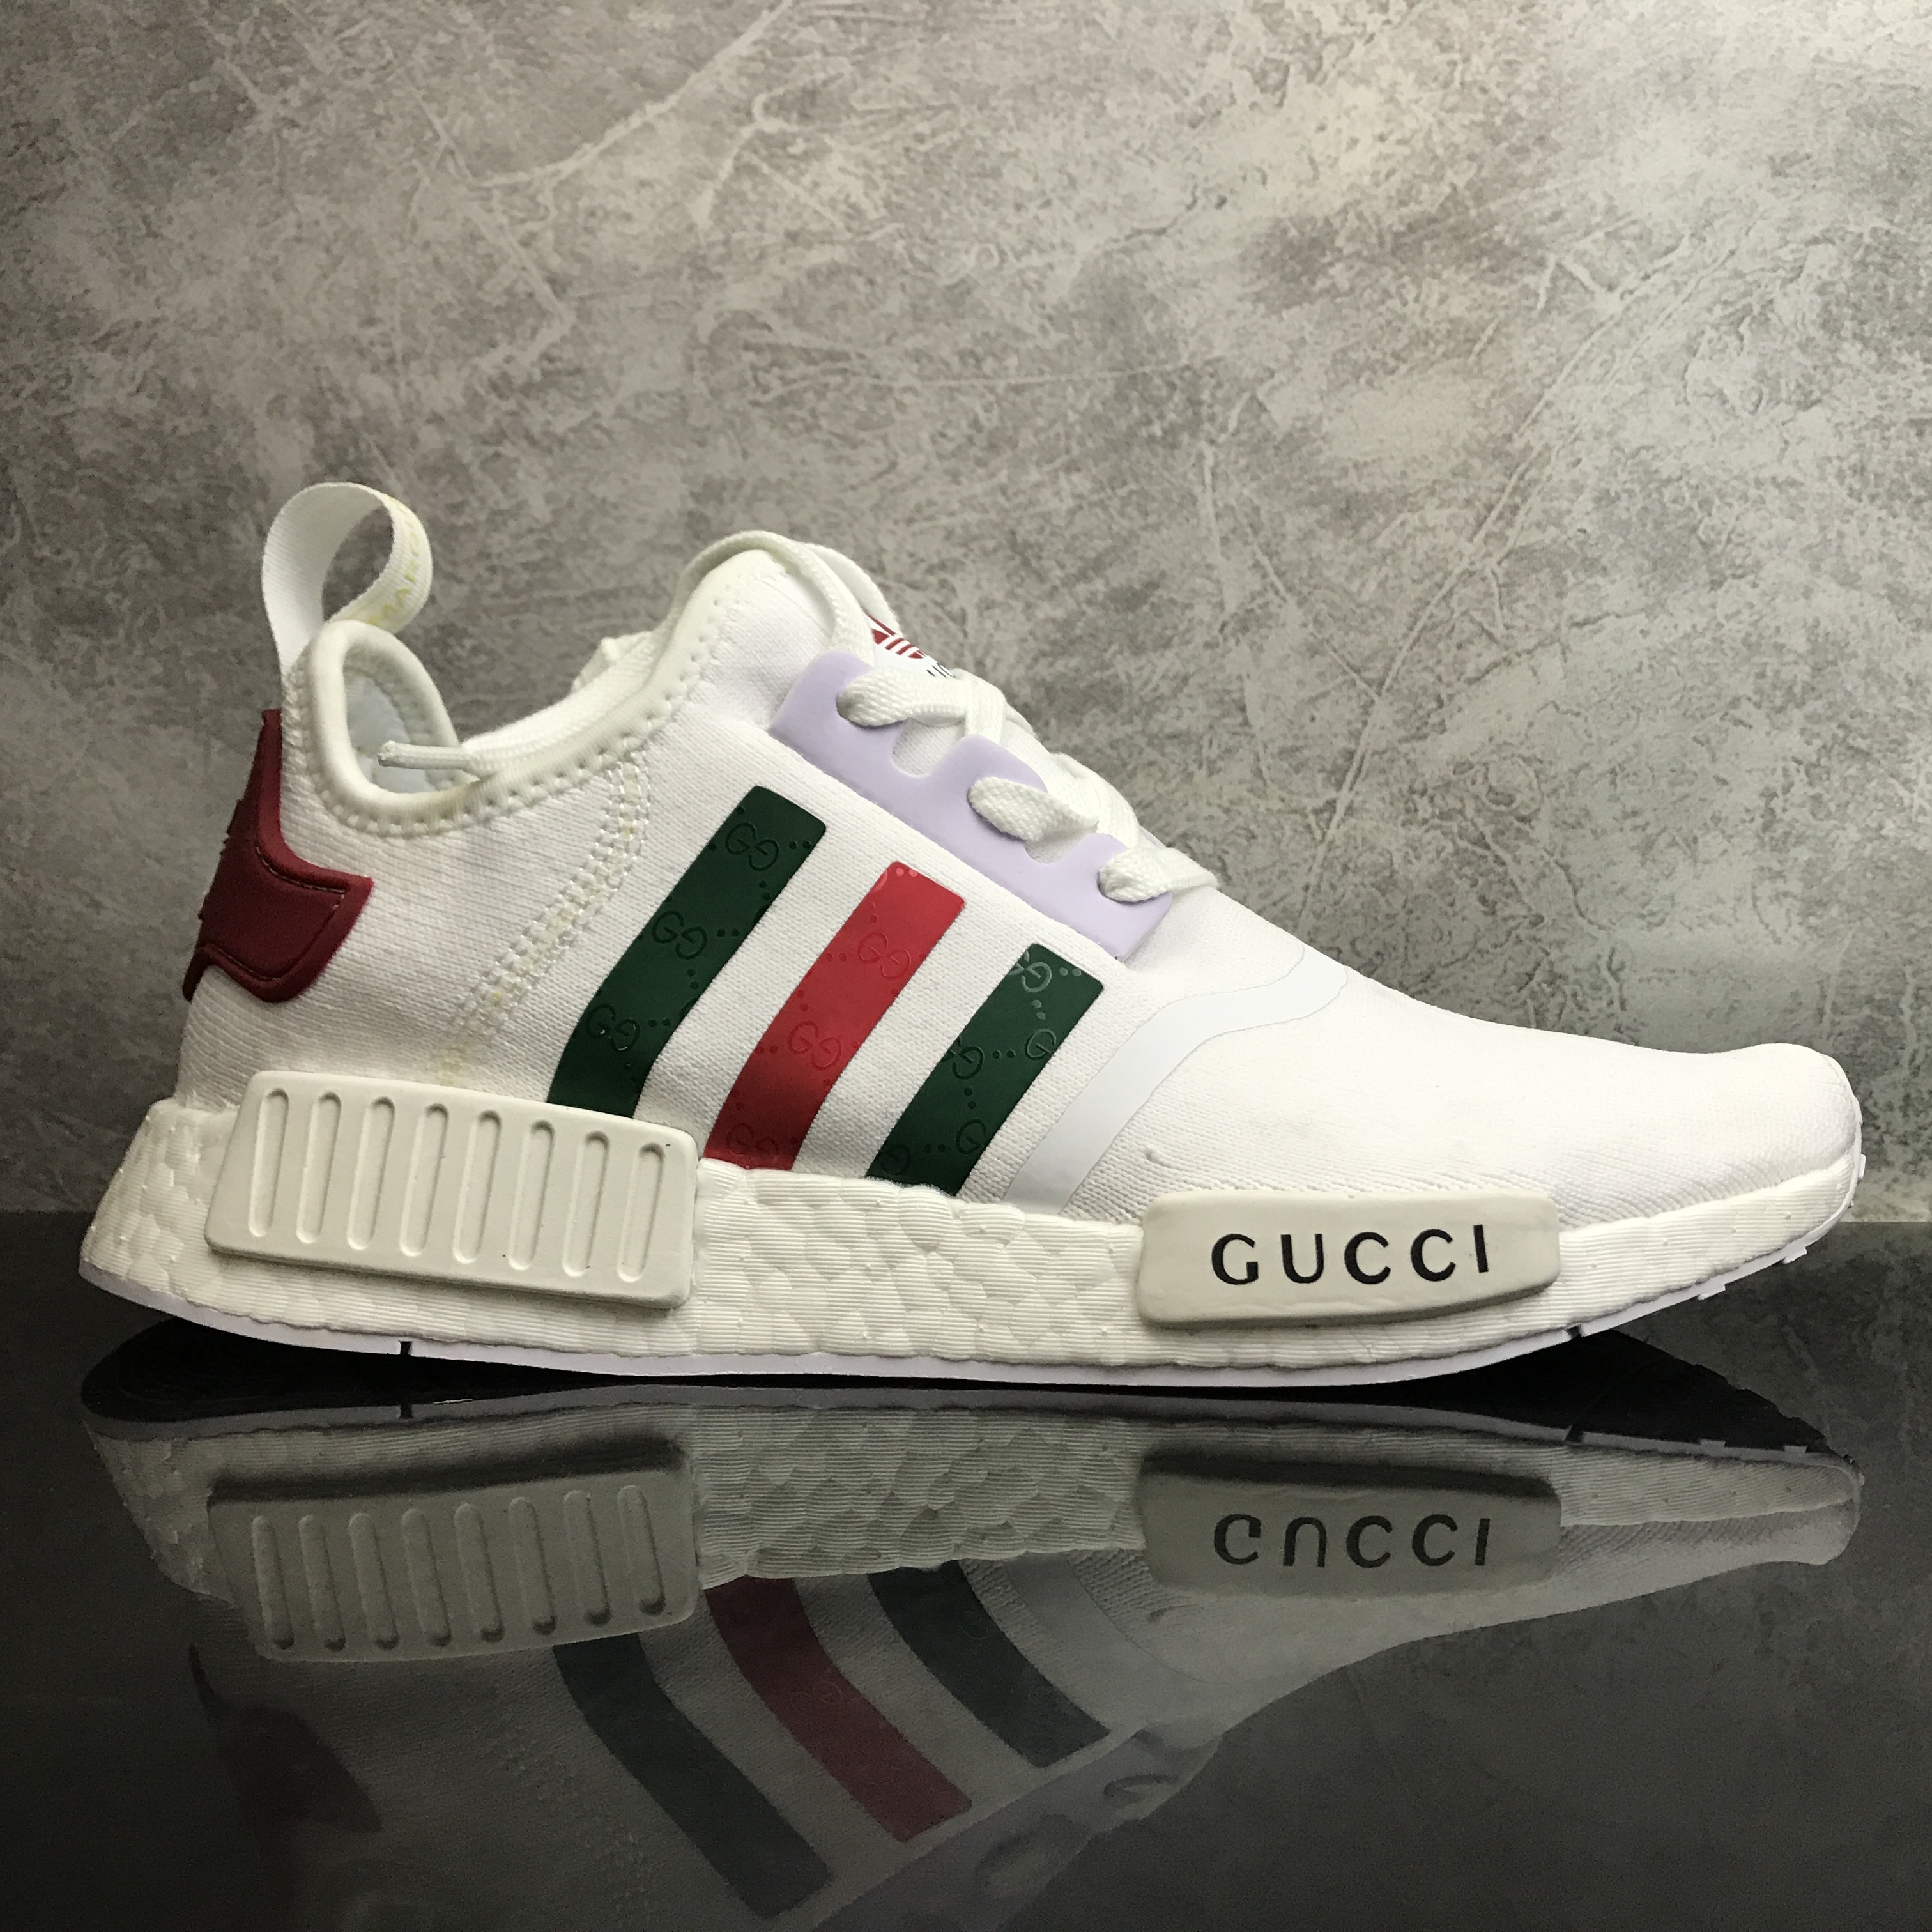 Gucci Nmd White Adidas Gucci X NMD R1 Boost Bygum Records